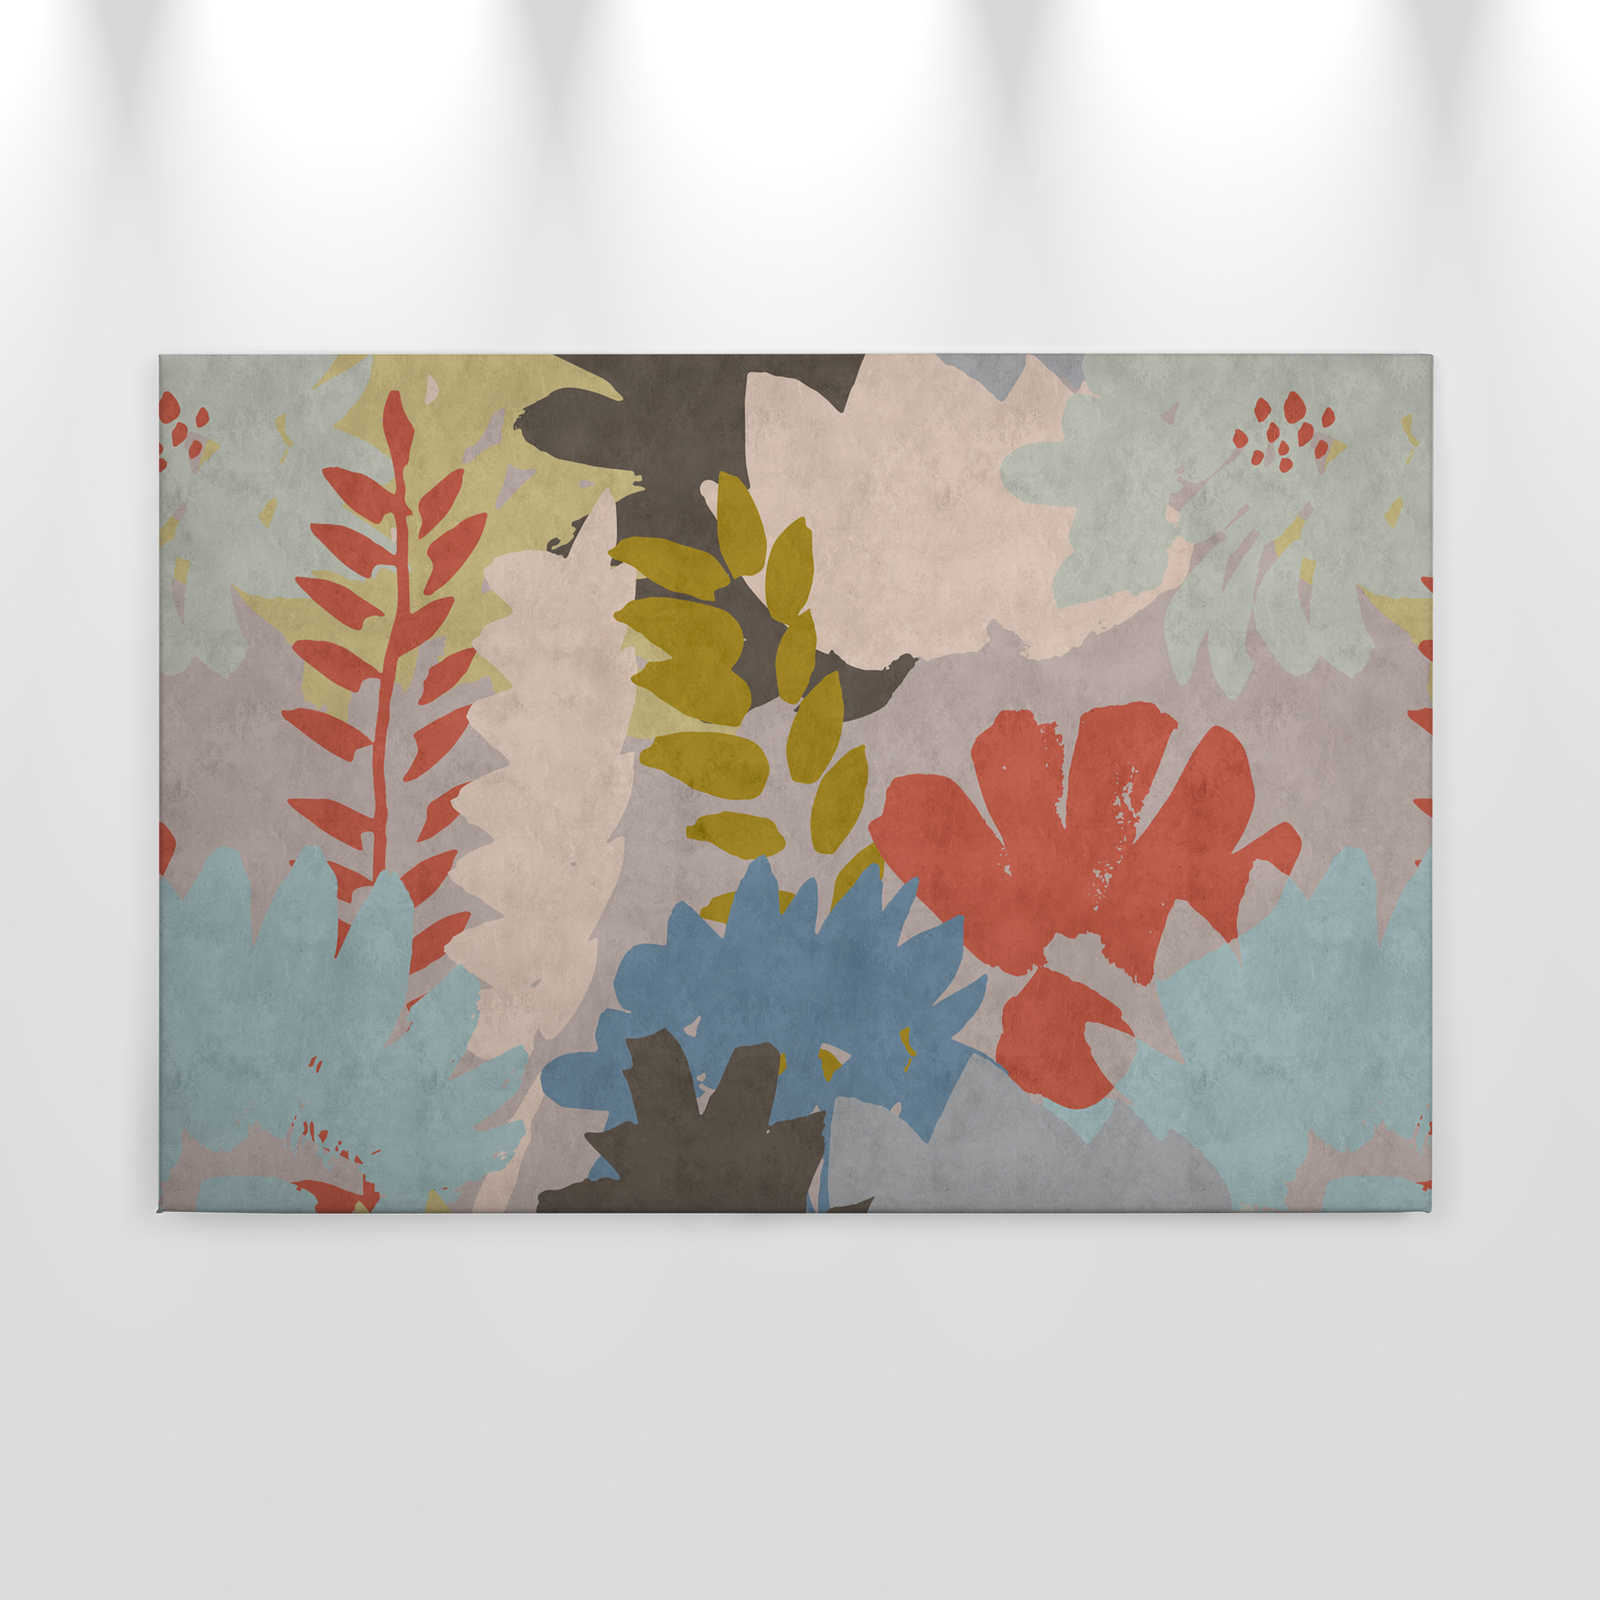             Floral Collage 3 - Abstract canvas picture in blotting paper structure with leaf motif - 0.90 m x 0.60 m
        